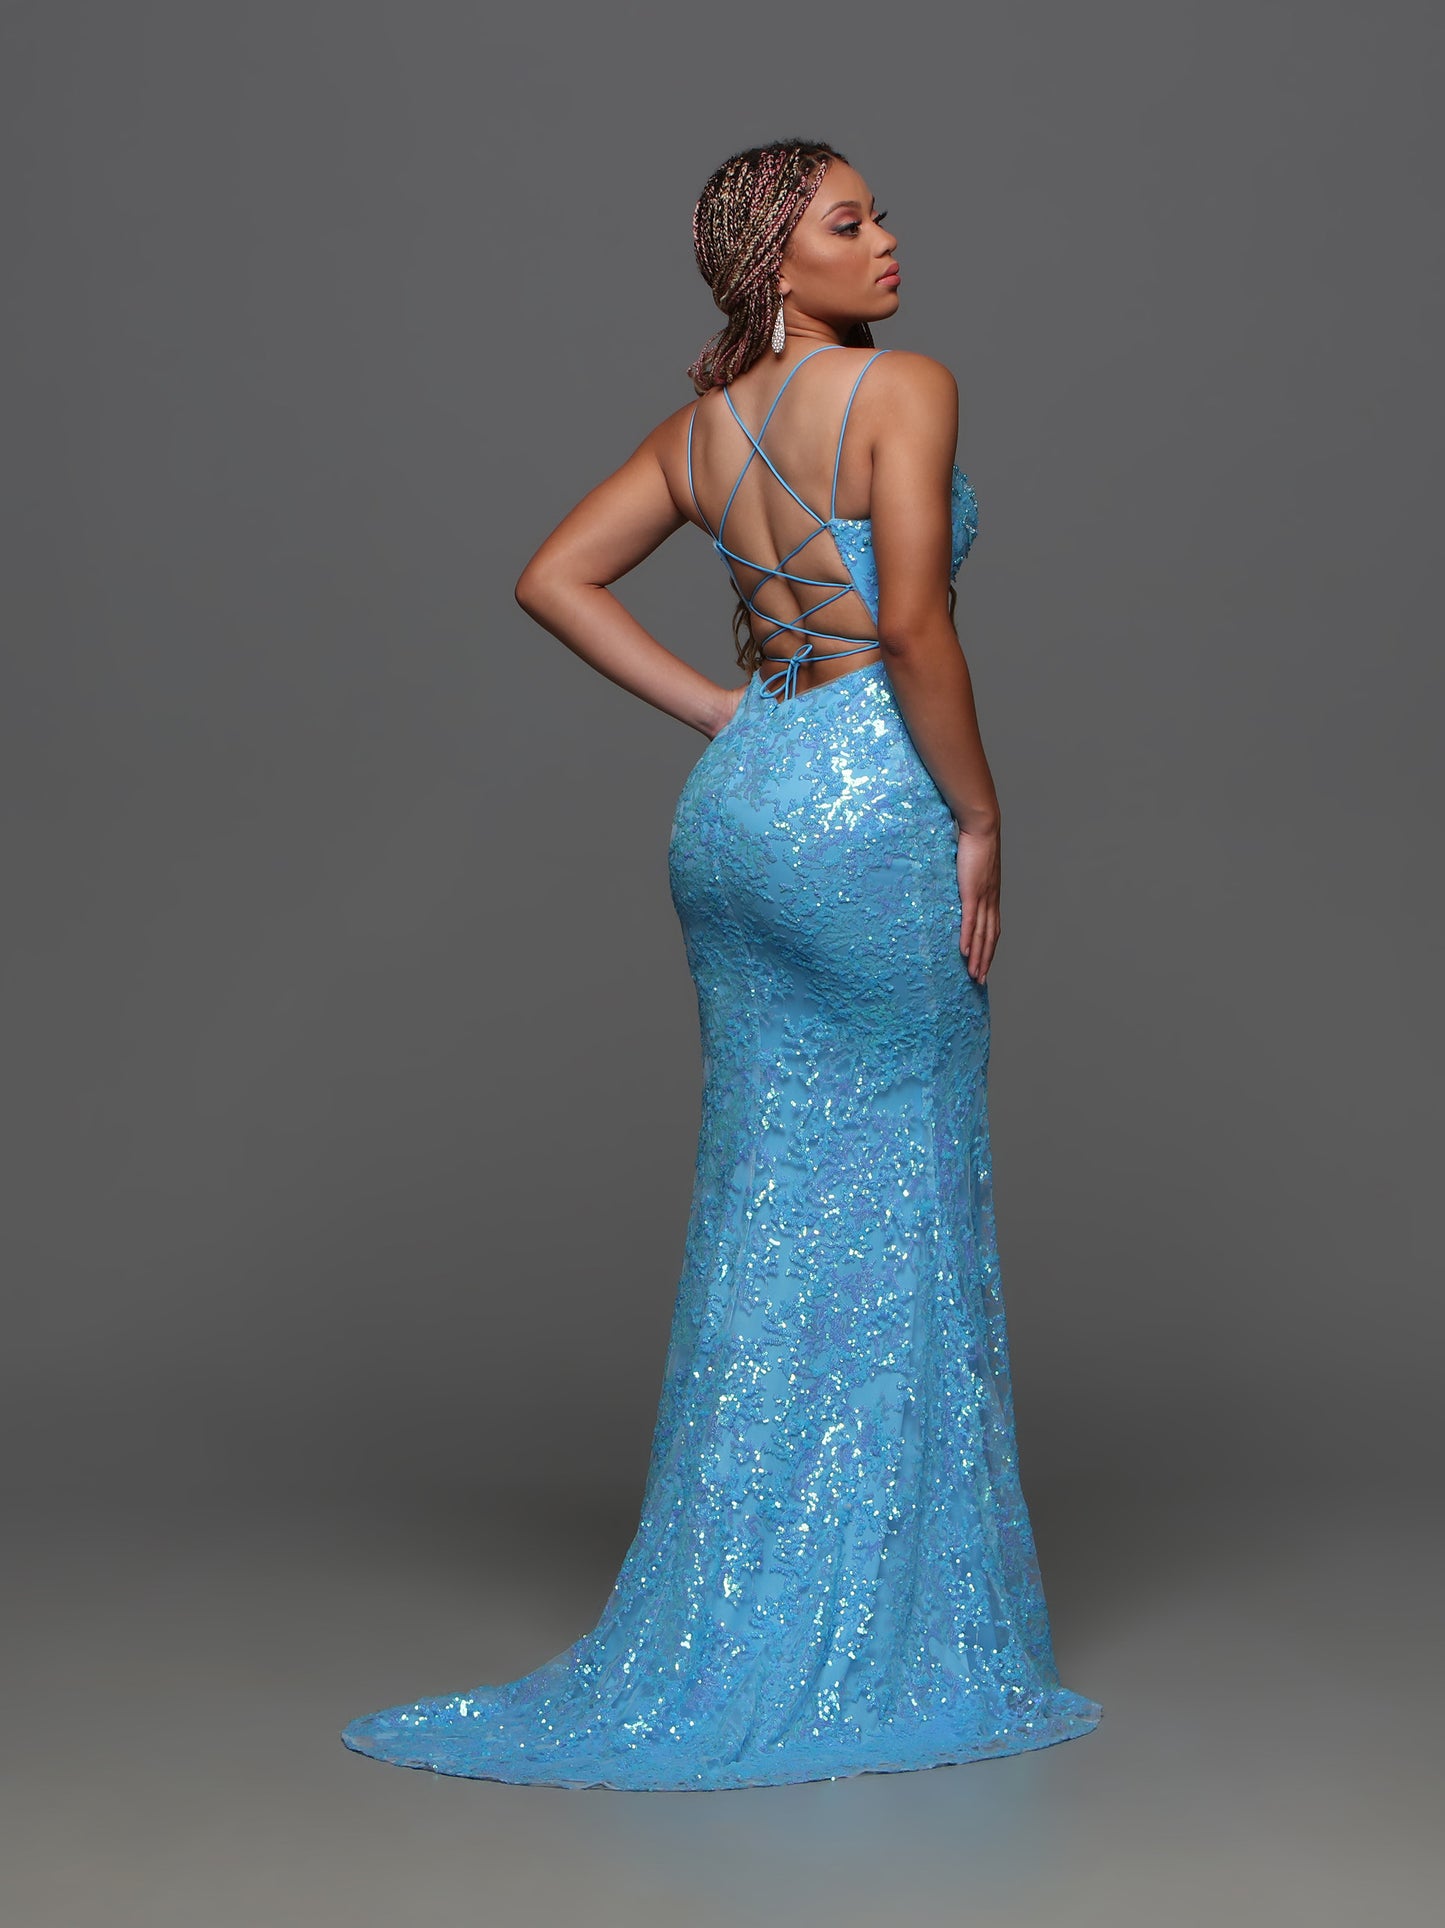 Elevate your prom night look with the stunning Candice Wang 72369 Sequin High Slit Backless Prom Dress. This elegant dress features a beautiful cowl neck, intricate beadwork, and a high slit for added glamour. With its sleek backless design, this formal gown is sure to turn heads.  Sizes: 0-20  Colors: Blue